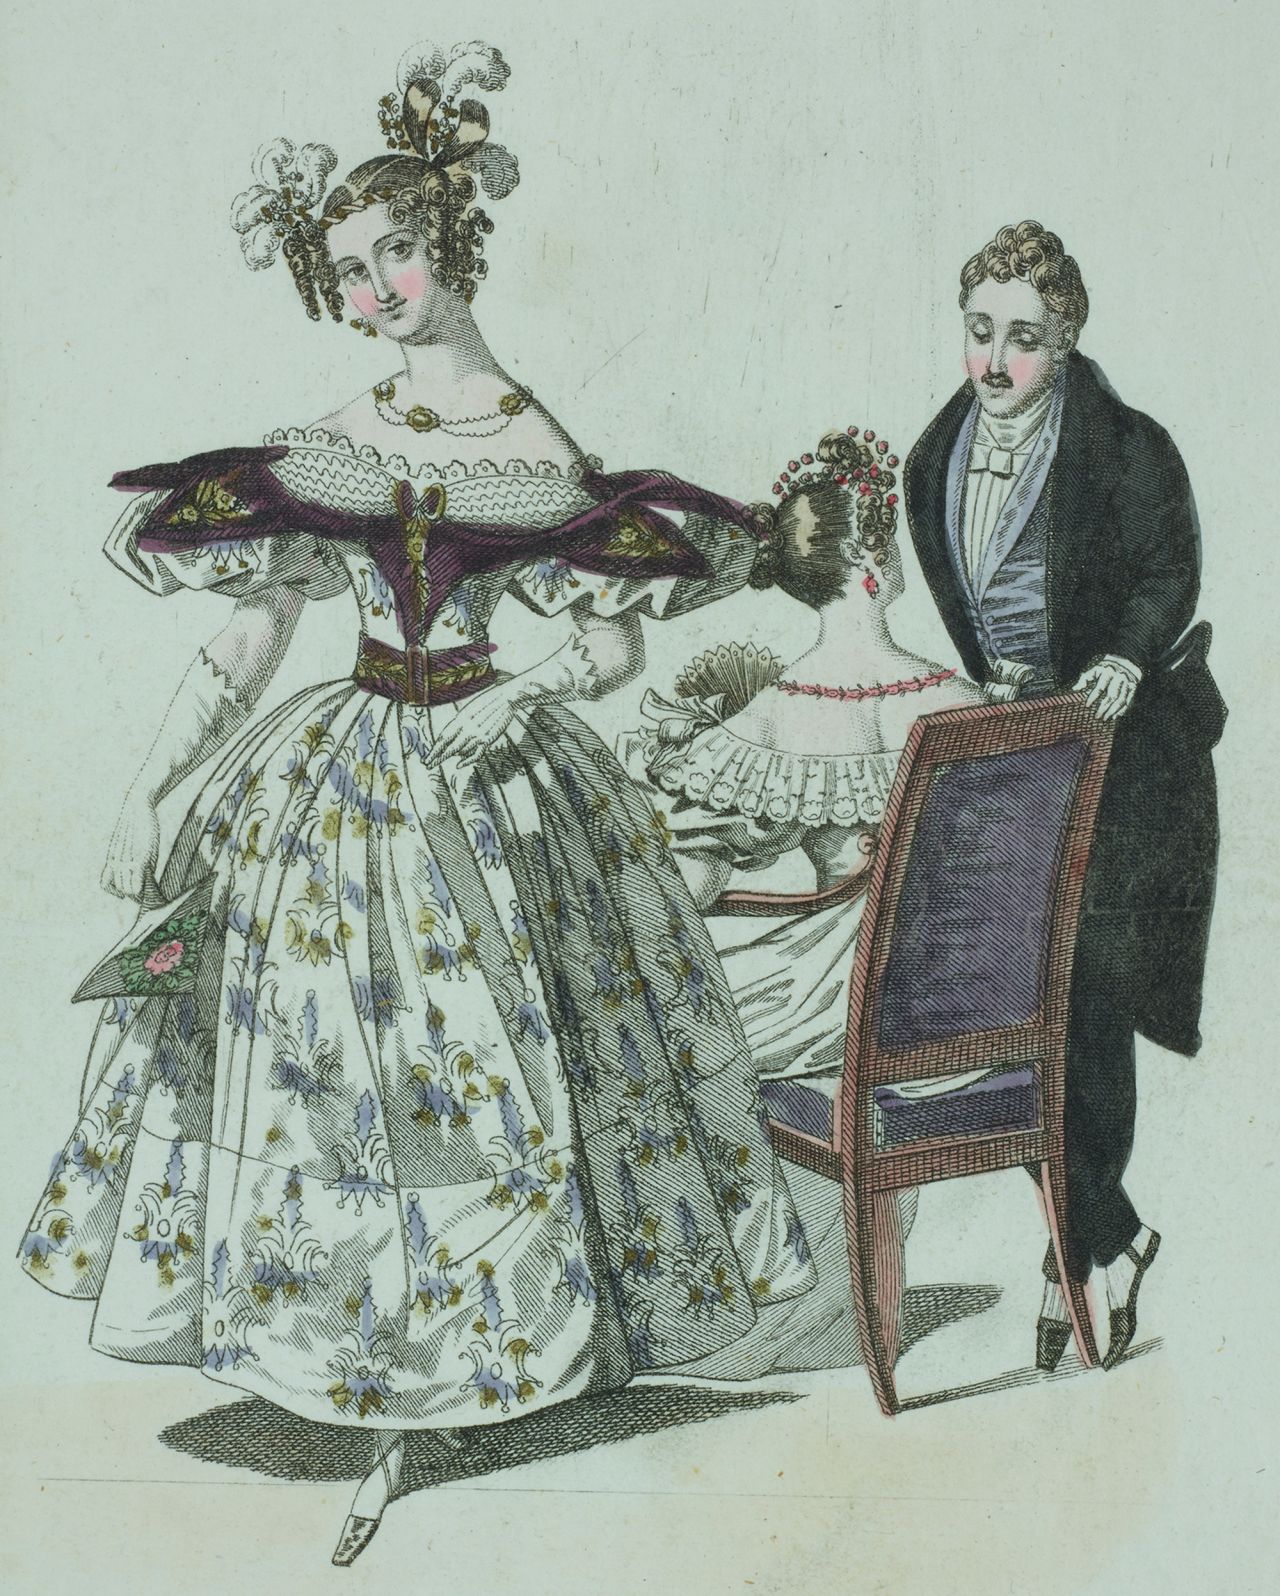 In an illustration from 1833 in France, a woman is pictured wearing a floral dress with purple velvet inserts. A man wears a formal suit, with lavender accents.